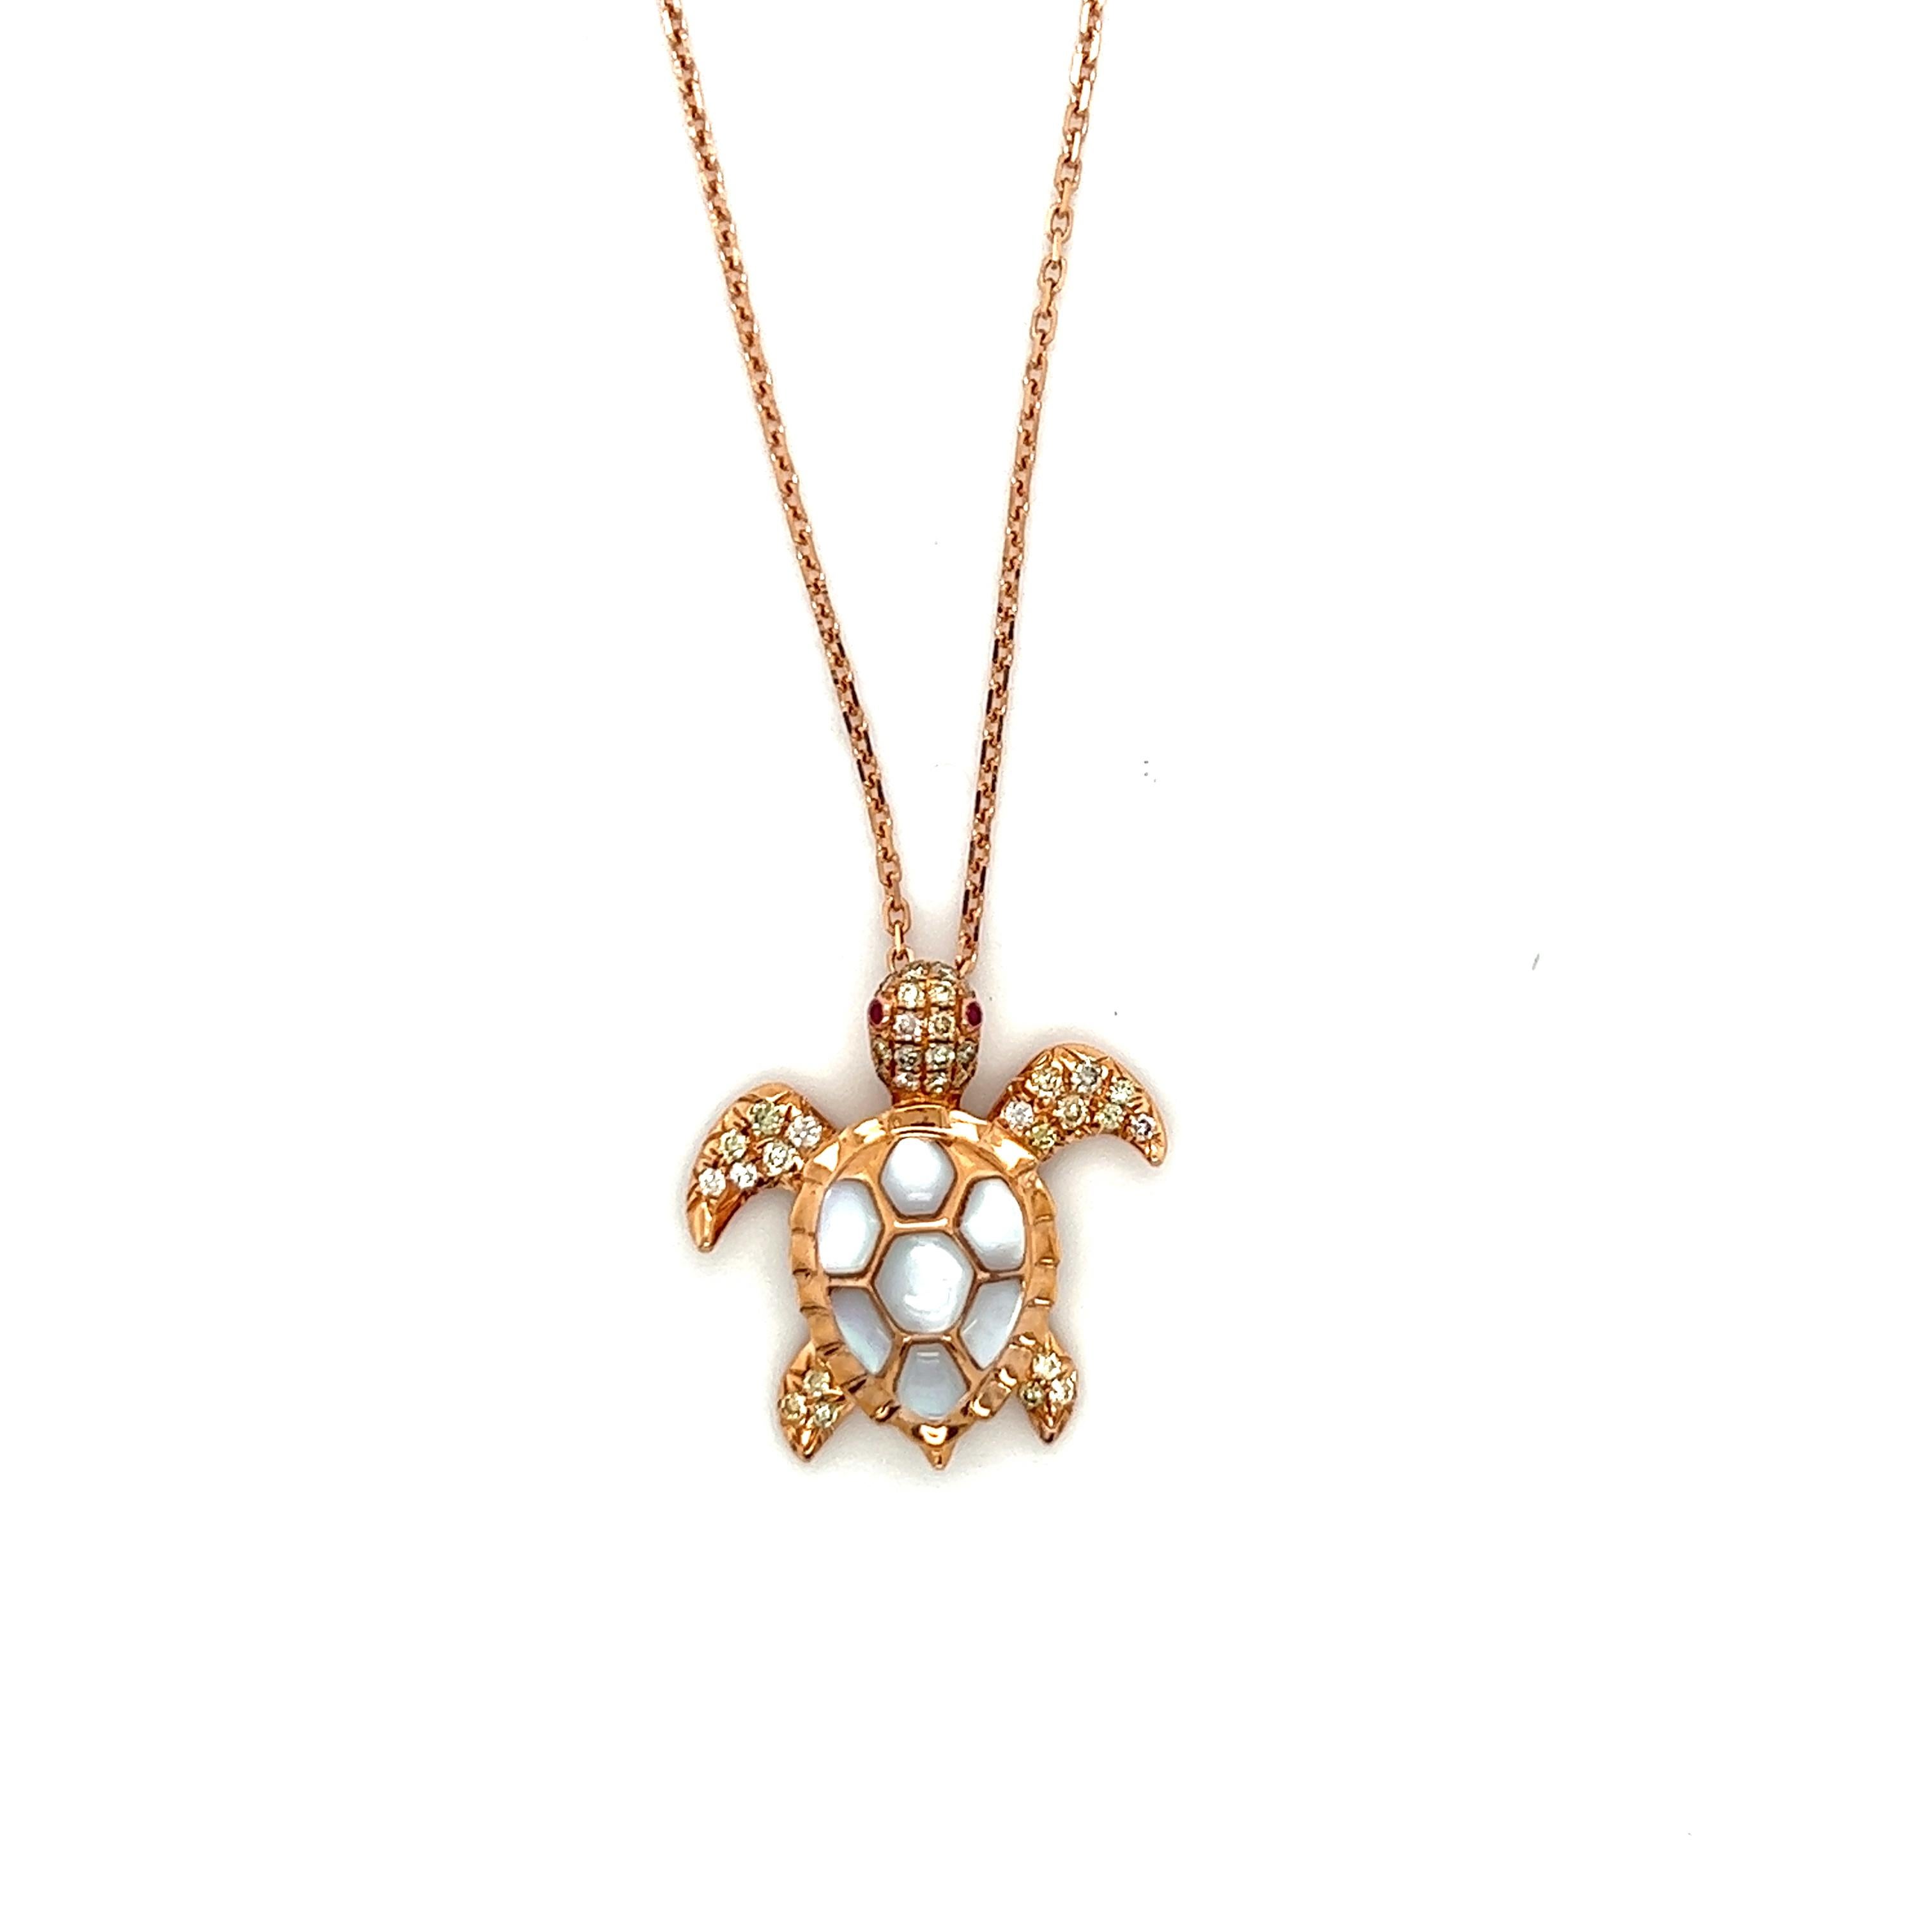 18 K Rose Gold White Shell & Fancy Diamonds Turtle Necklace

40 Fancy Diamonds 0.26 CT
2 Rubies 0.01 CT
7 White Pearls 0.70 CT
18 K Rose Gold 5.10 GM

The pearl meaning is centered around purity, balance, and inner wisdom. Pearls have long been a